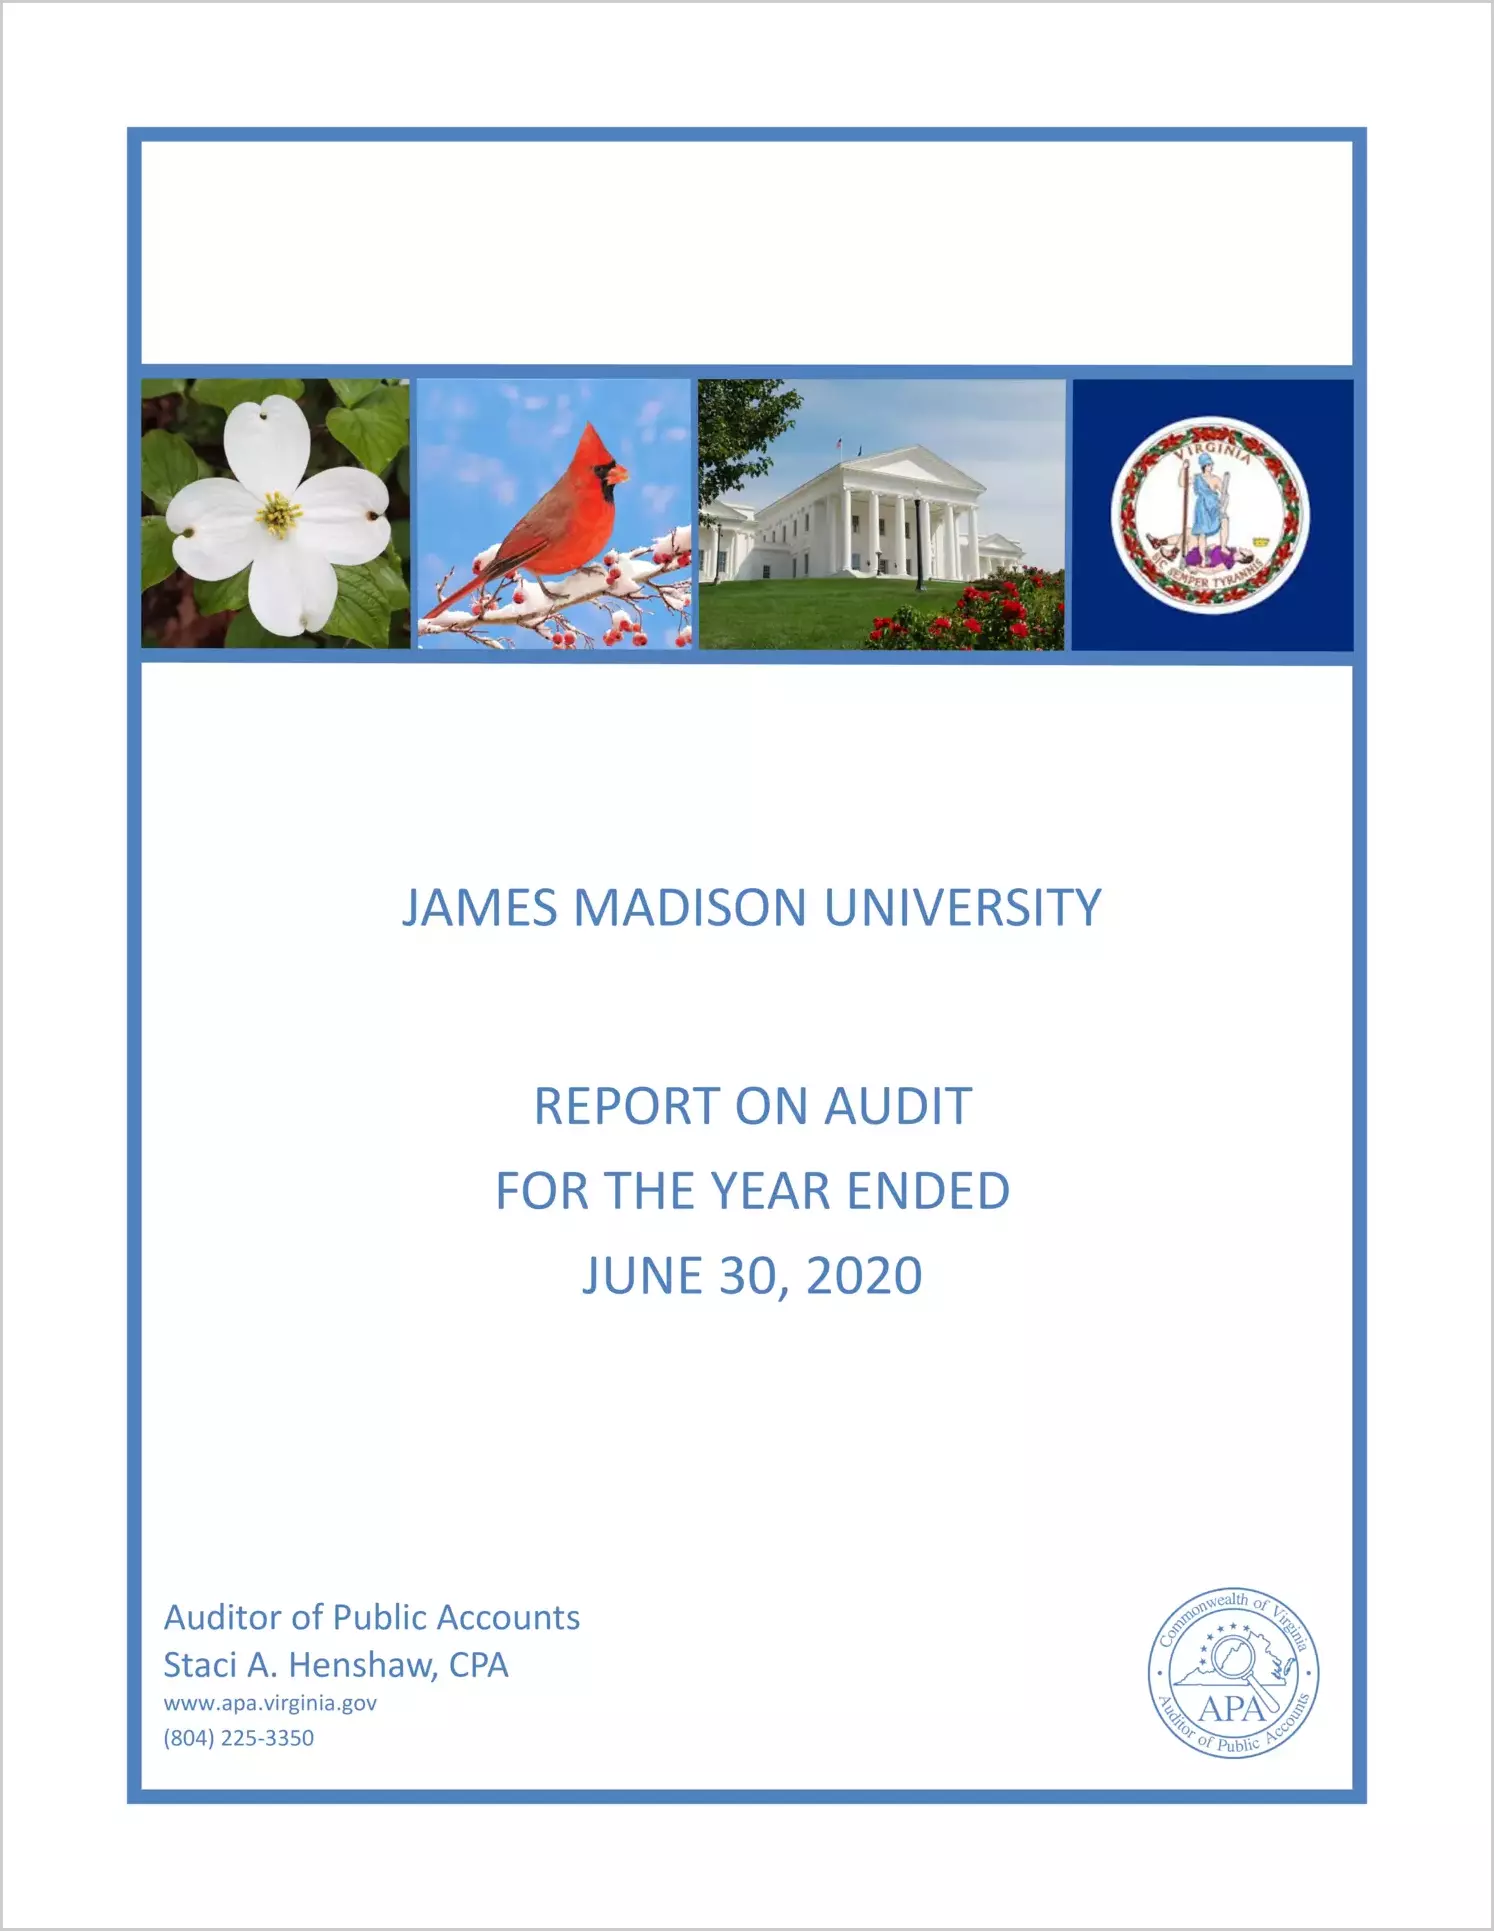 James Madison University for the year ended June 30, 2020